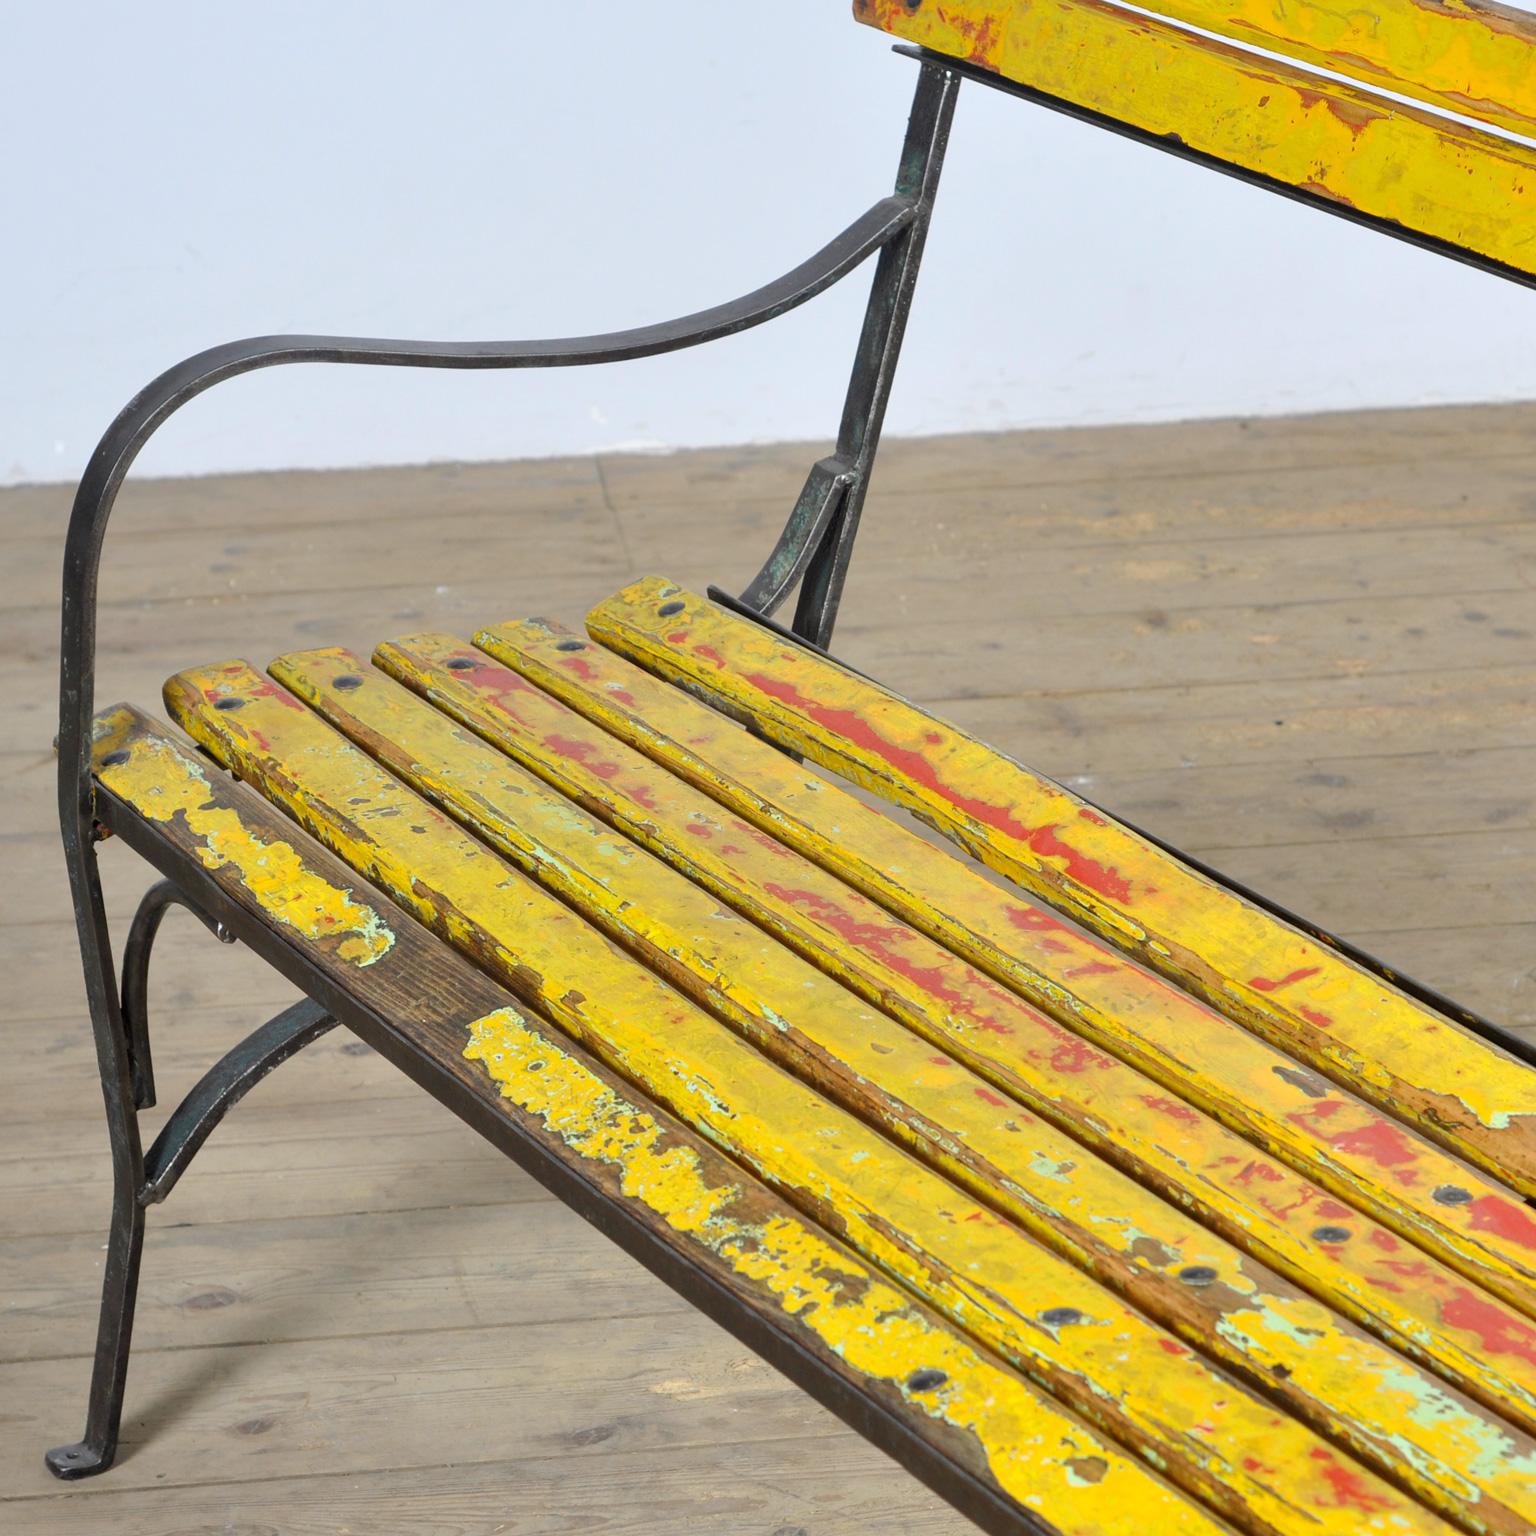 Iron Garden Bench 1930s In Fair Condition For Sale In Amsterdam, Noord Holland